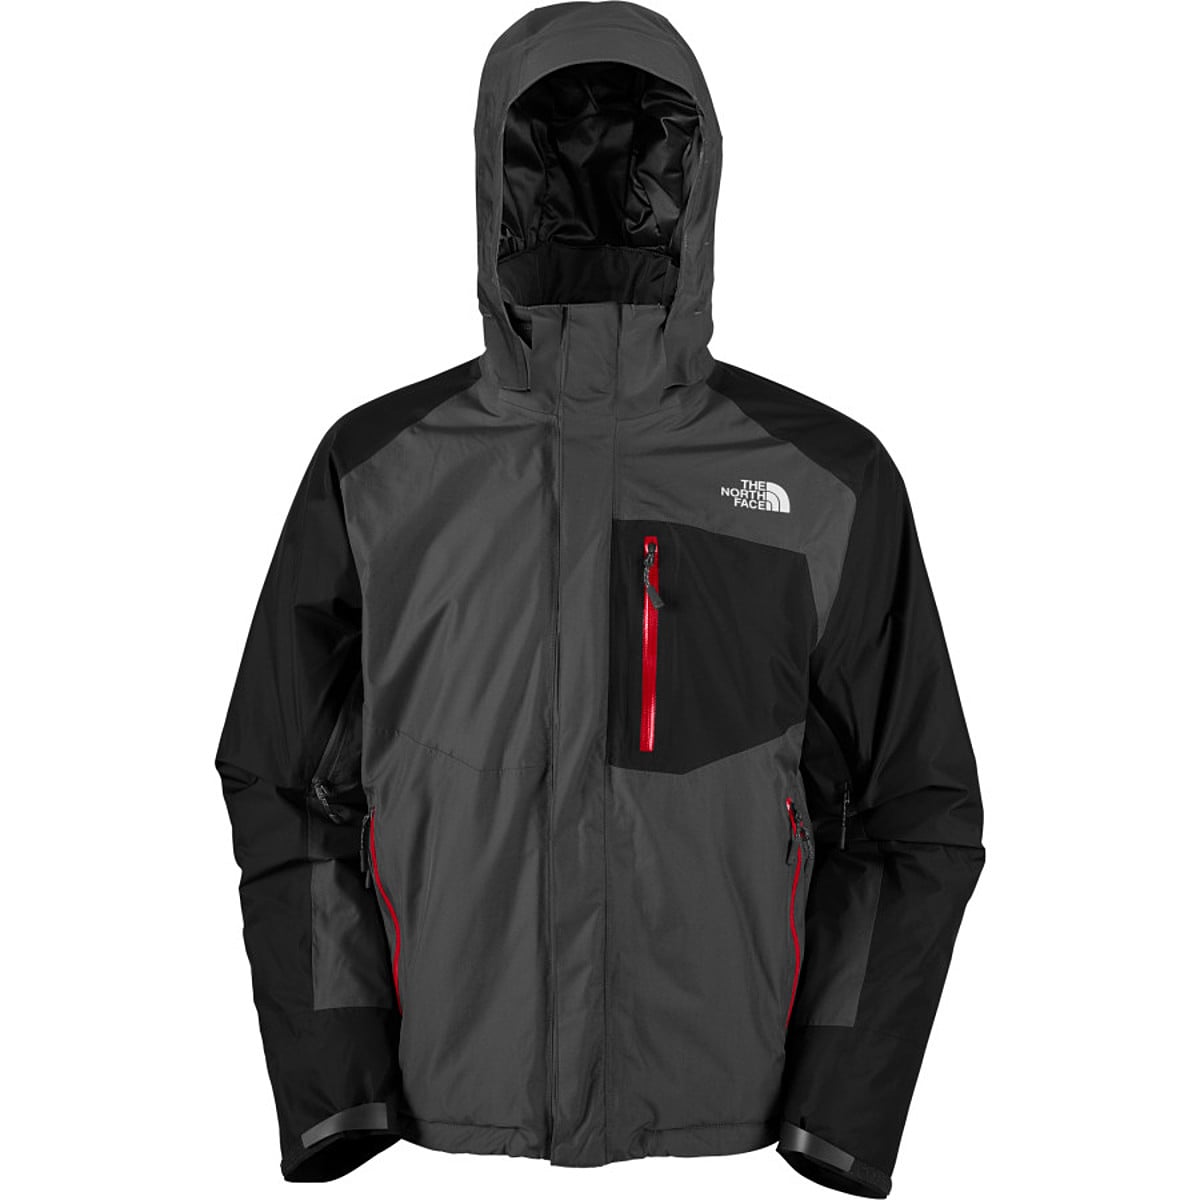 The north face summit series. The North face Primaloft куртка. The North face HYVENT Alpha Summit Series. The North face HYVENT Alpha. The North face Summit Series куртки.